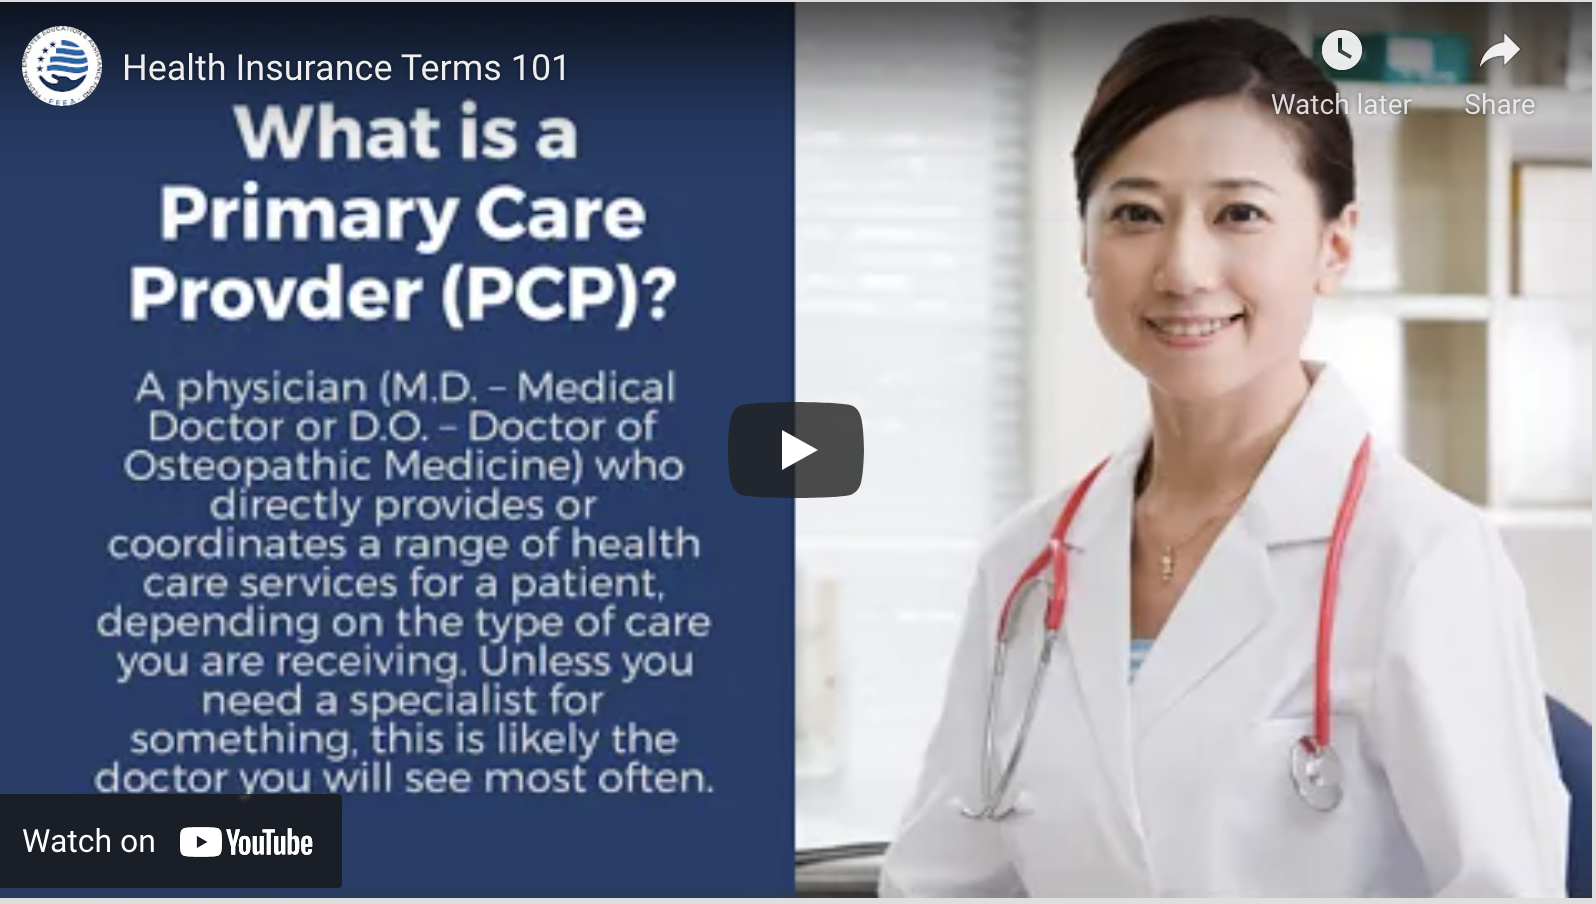 Featured Image for post: Health Insurance 101 Video